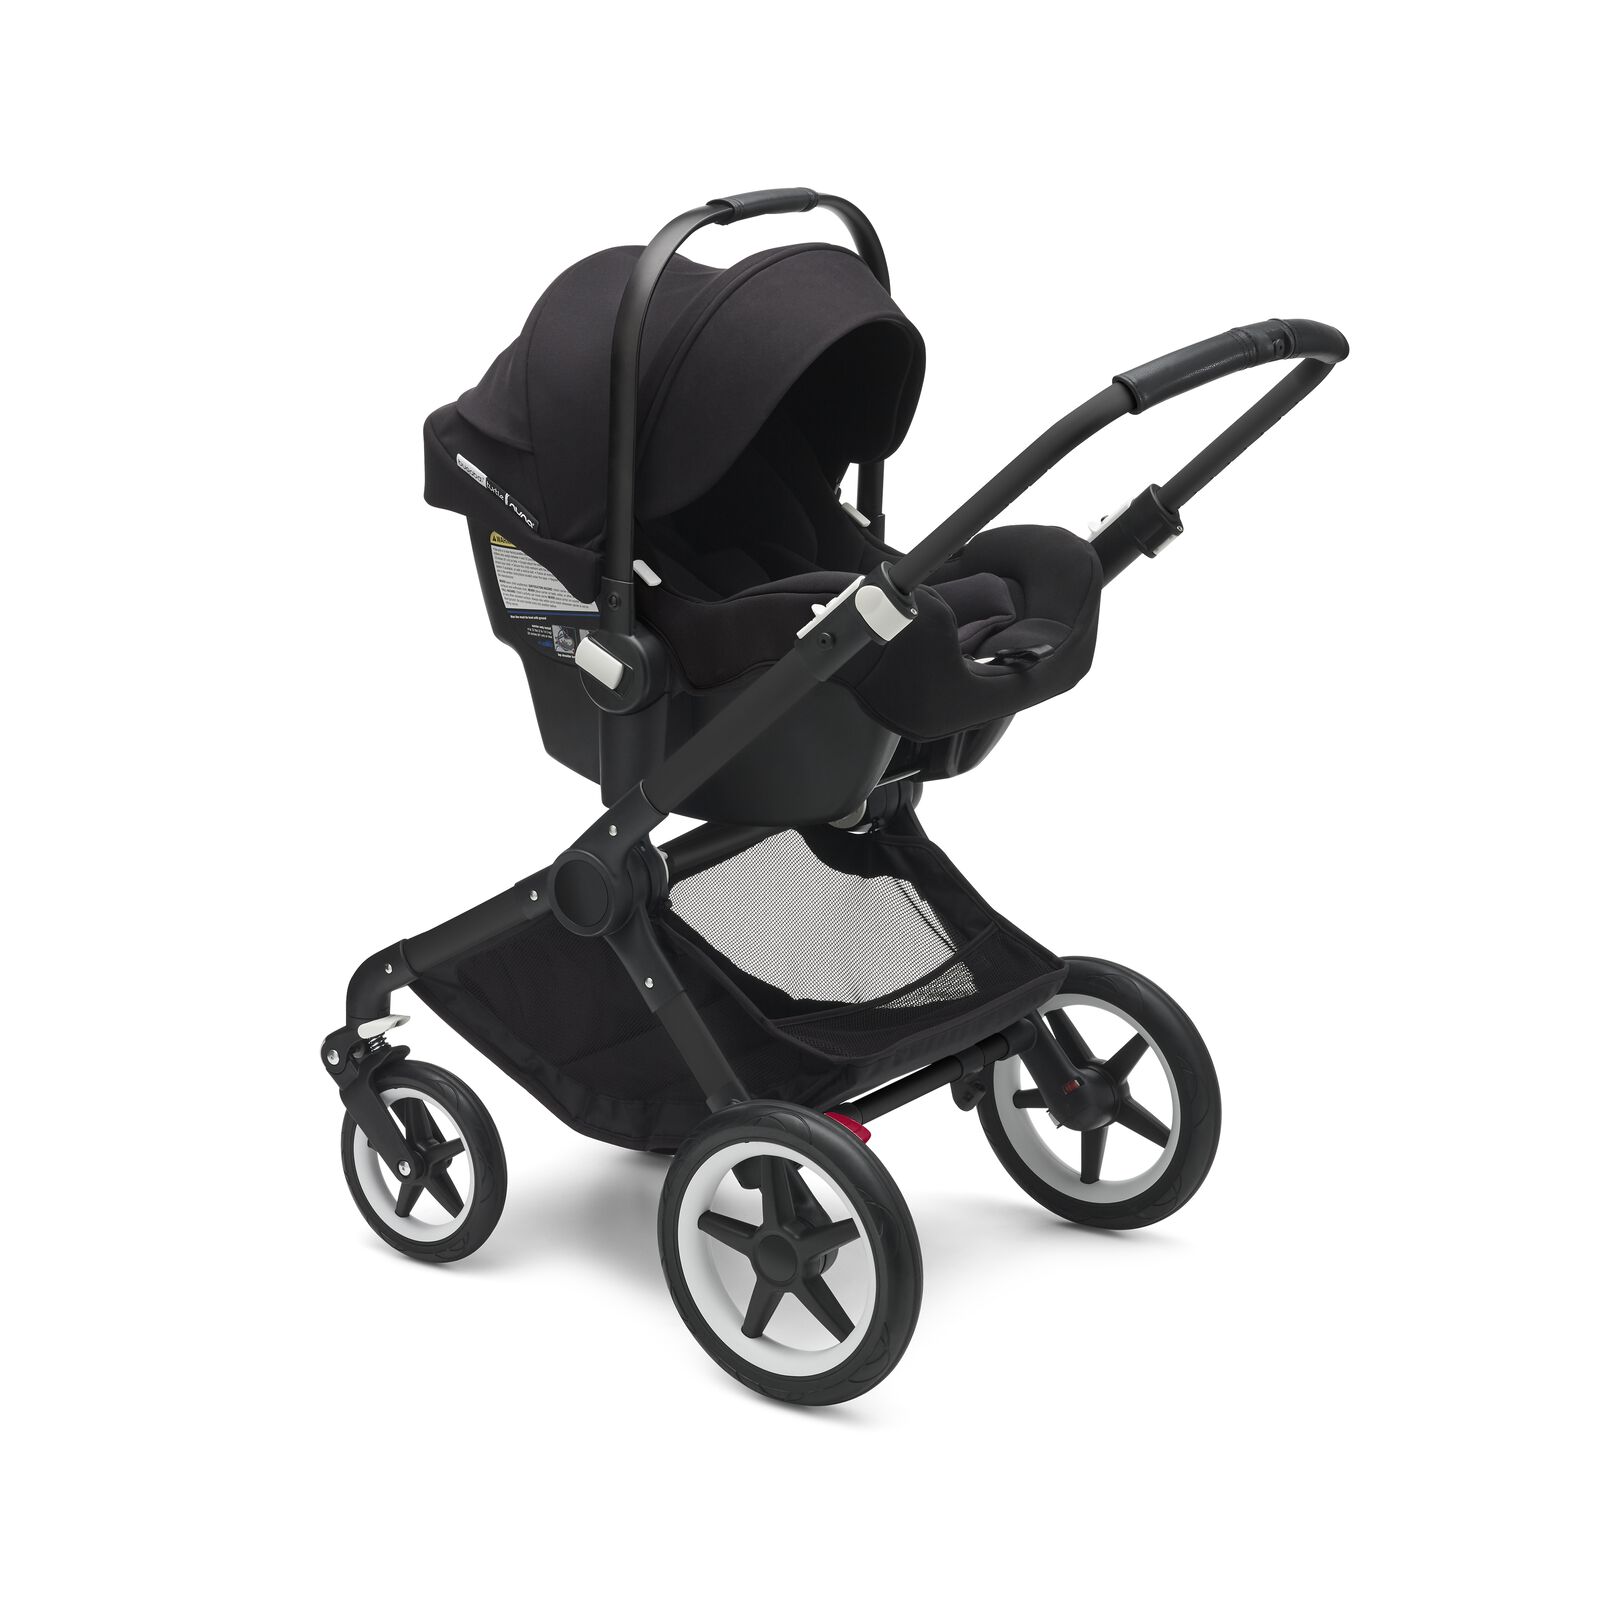 Bugaboo Turtle by Nuna baby capsule with Isofix base - View 2